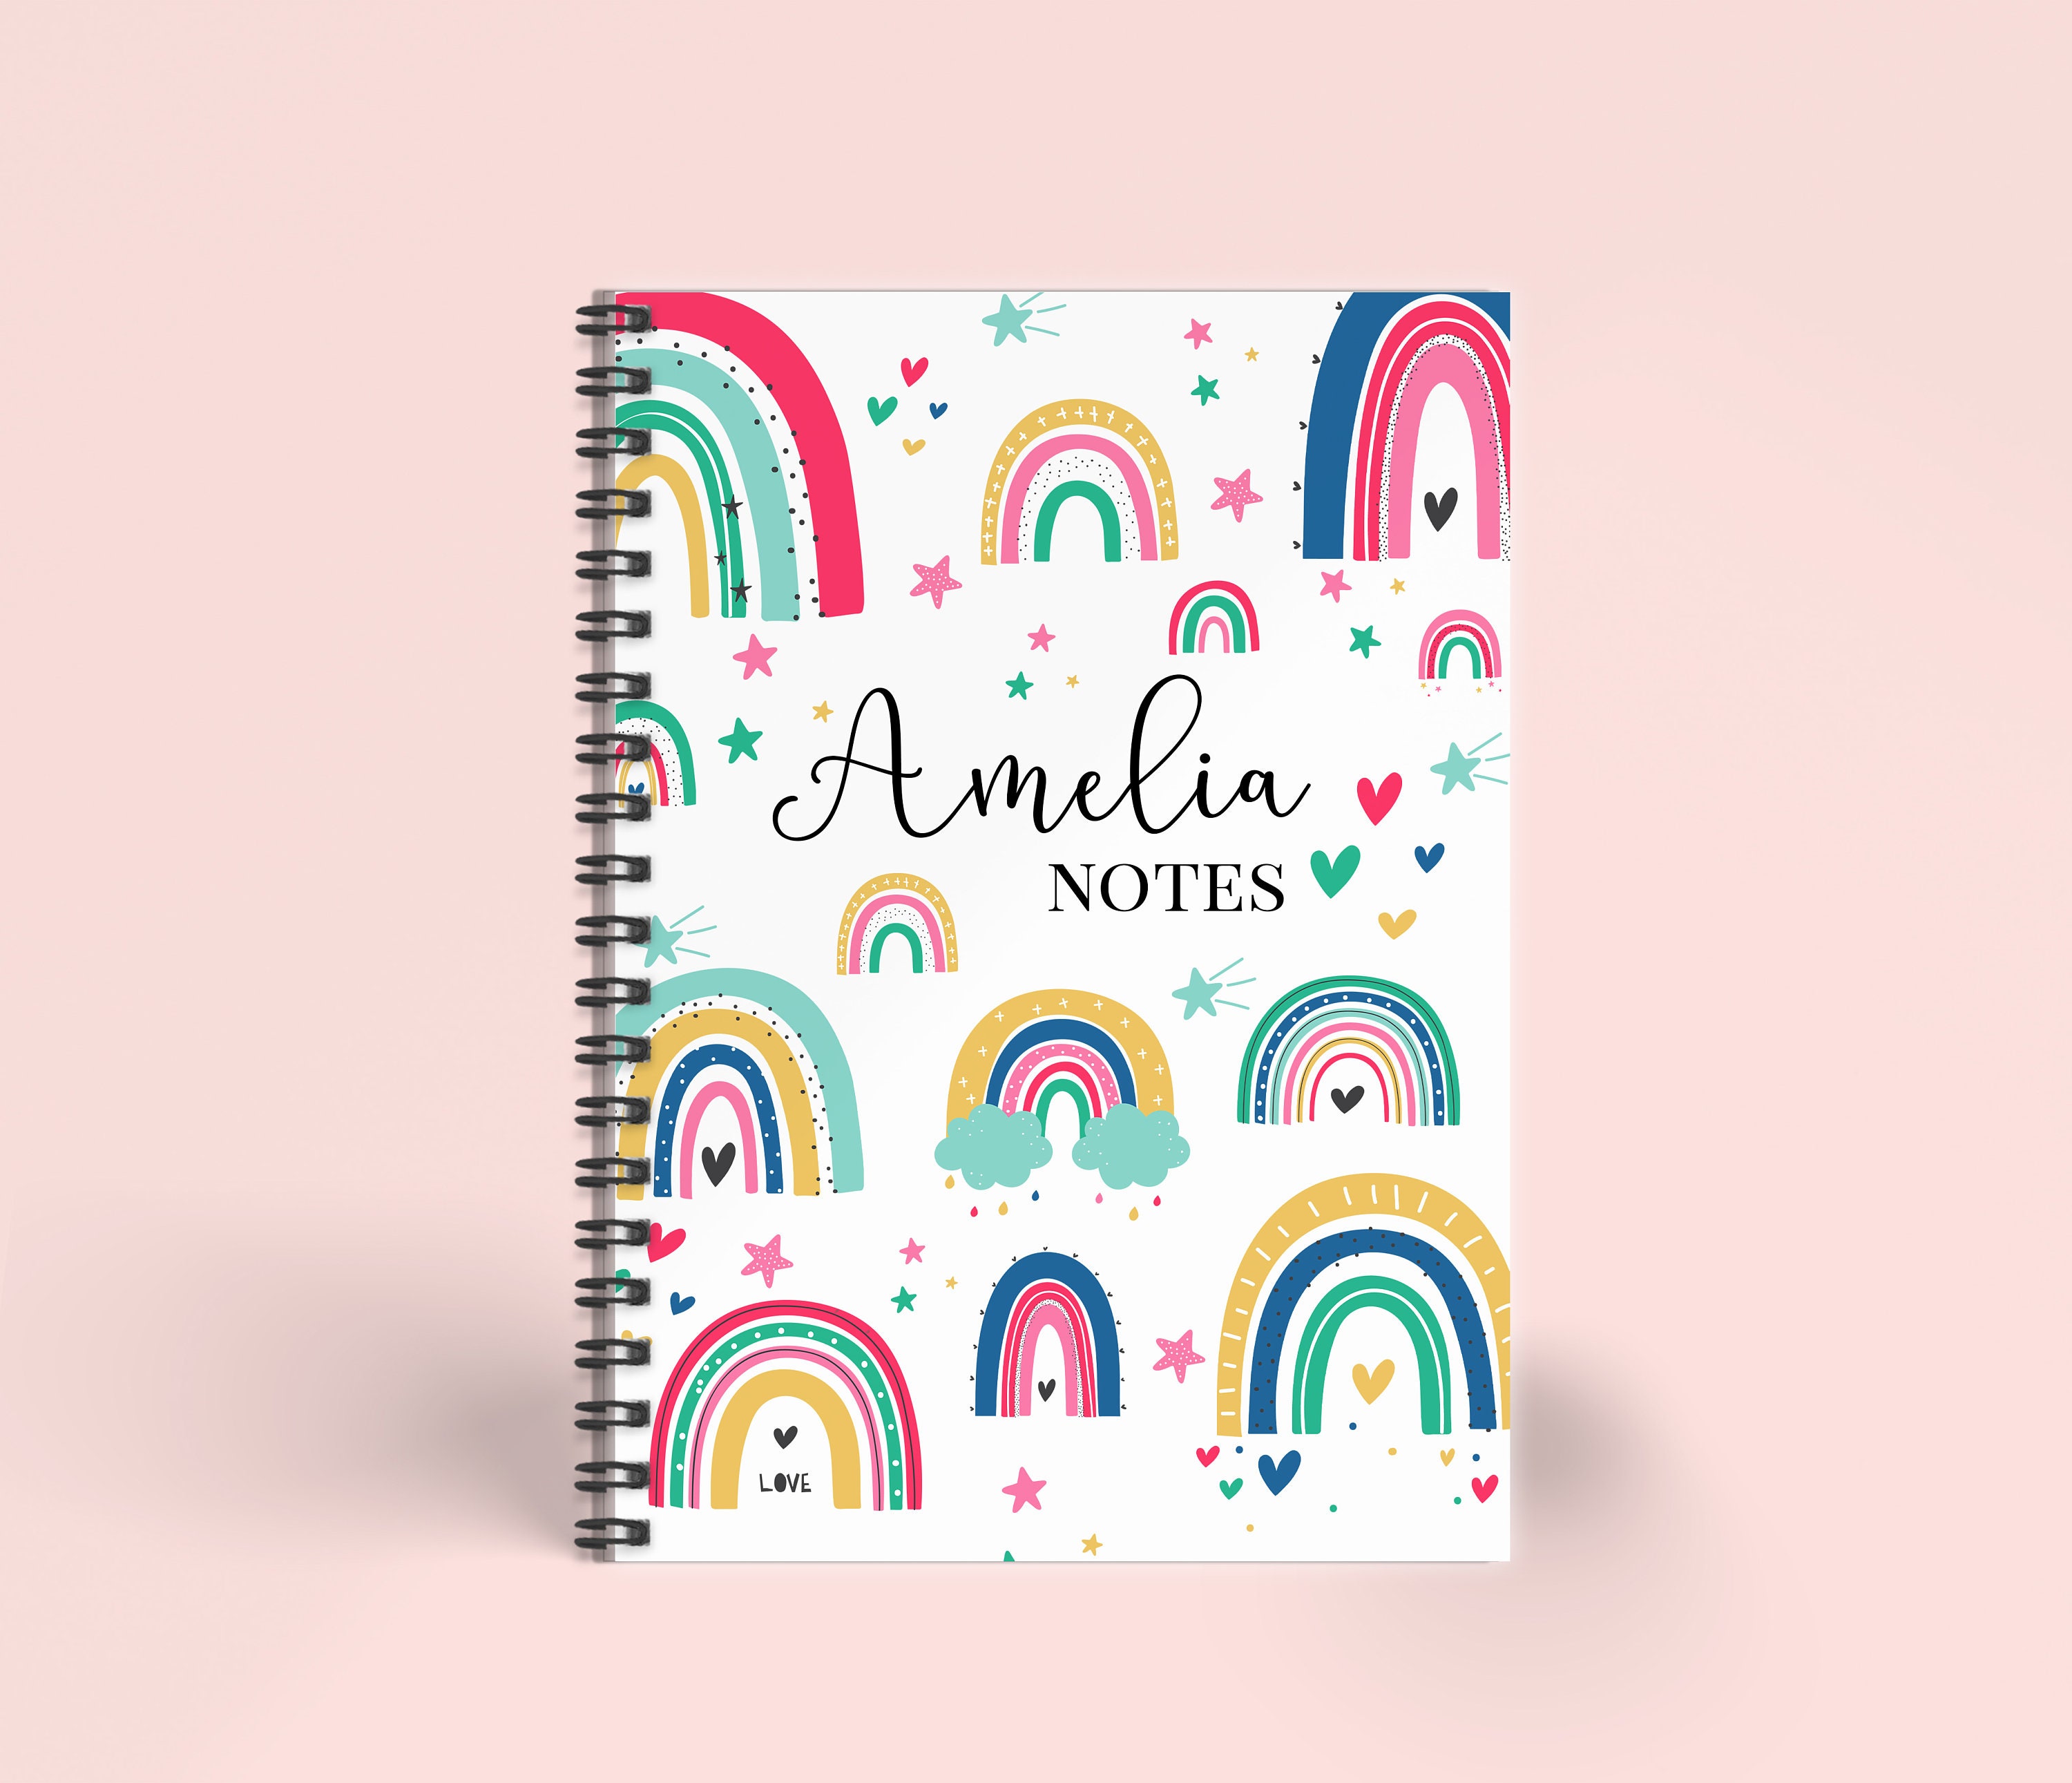 Christmas Personalised Sketch Pad for Kids: A Mini Drawing Pad for Kids  With 100 Blank Pages. the Perfect Stocking Filler. 